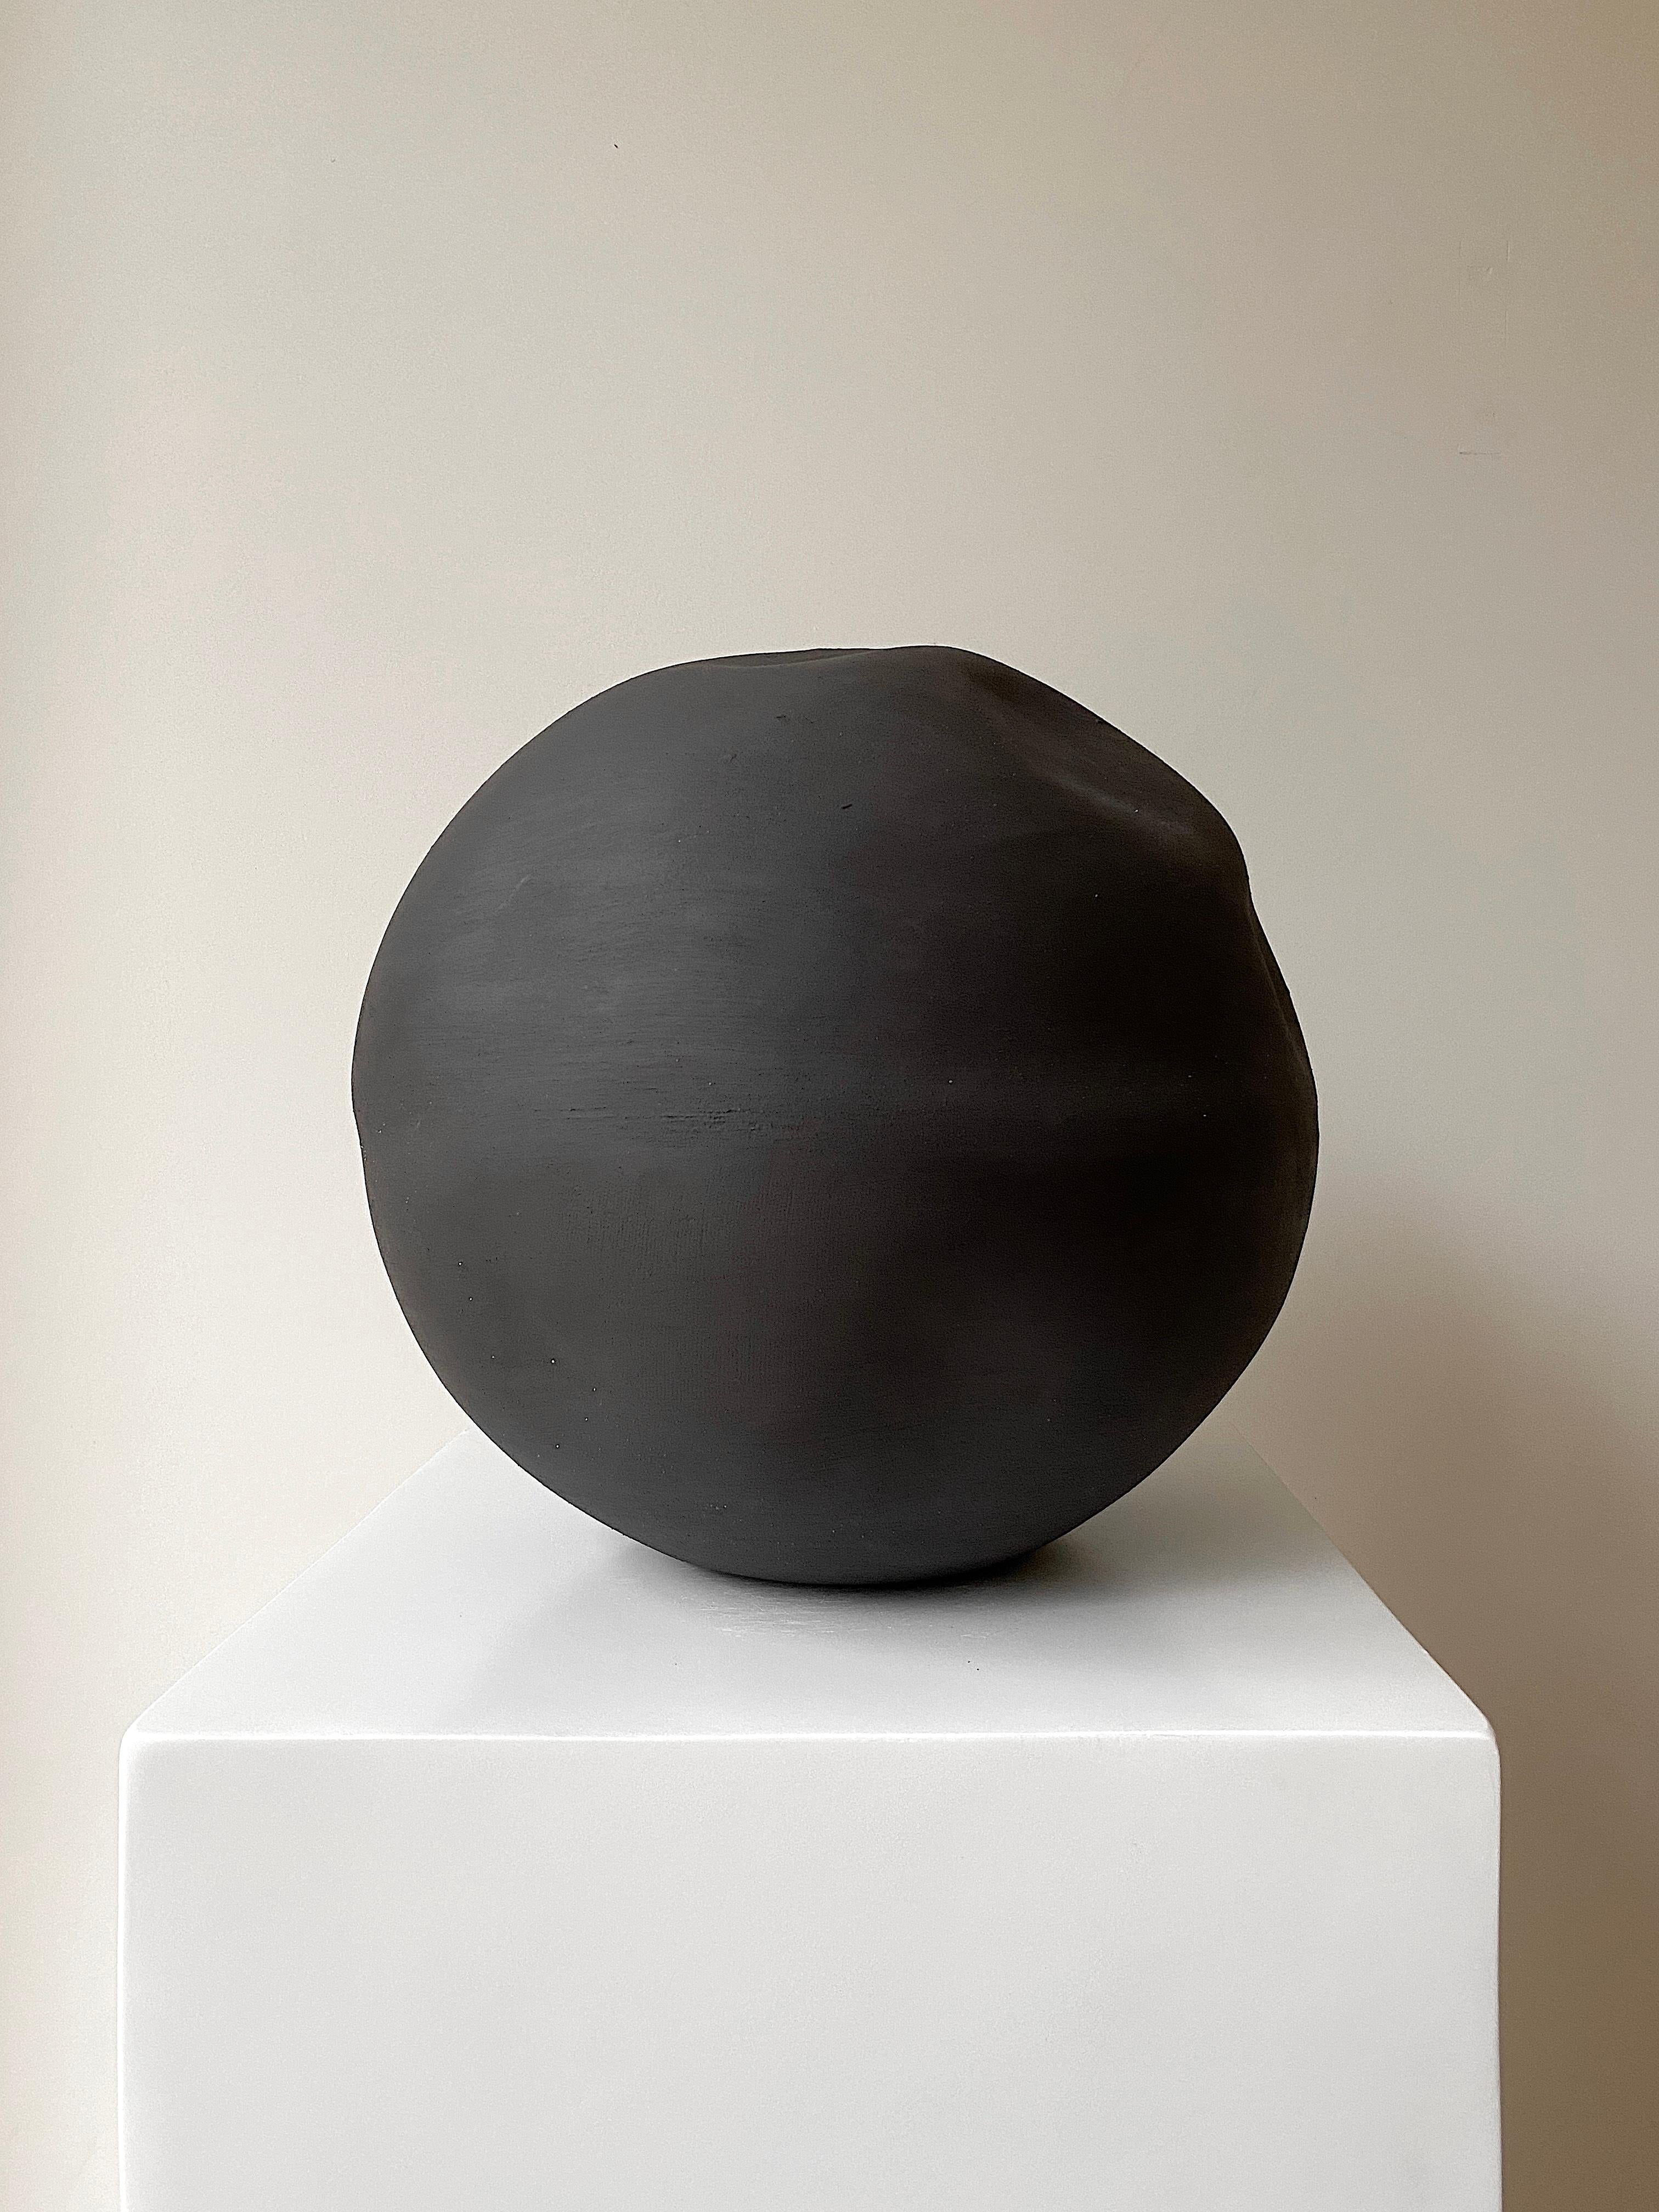 Black soft moon by Laura Pasquino
Dimensions: Ø 32 x H 31 cm, opening Ø 1 cm
Materials: stoneware ceramic
Finishing: unglazed natural stoneware
Colour: black

Laura Pasquino
Incorporating references from ancient Korean ceramics as well as